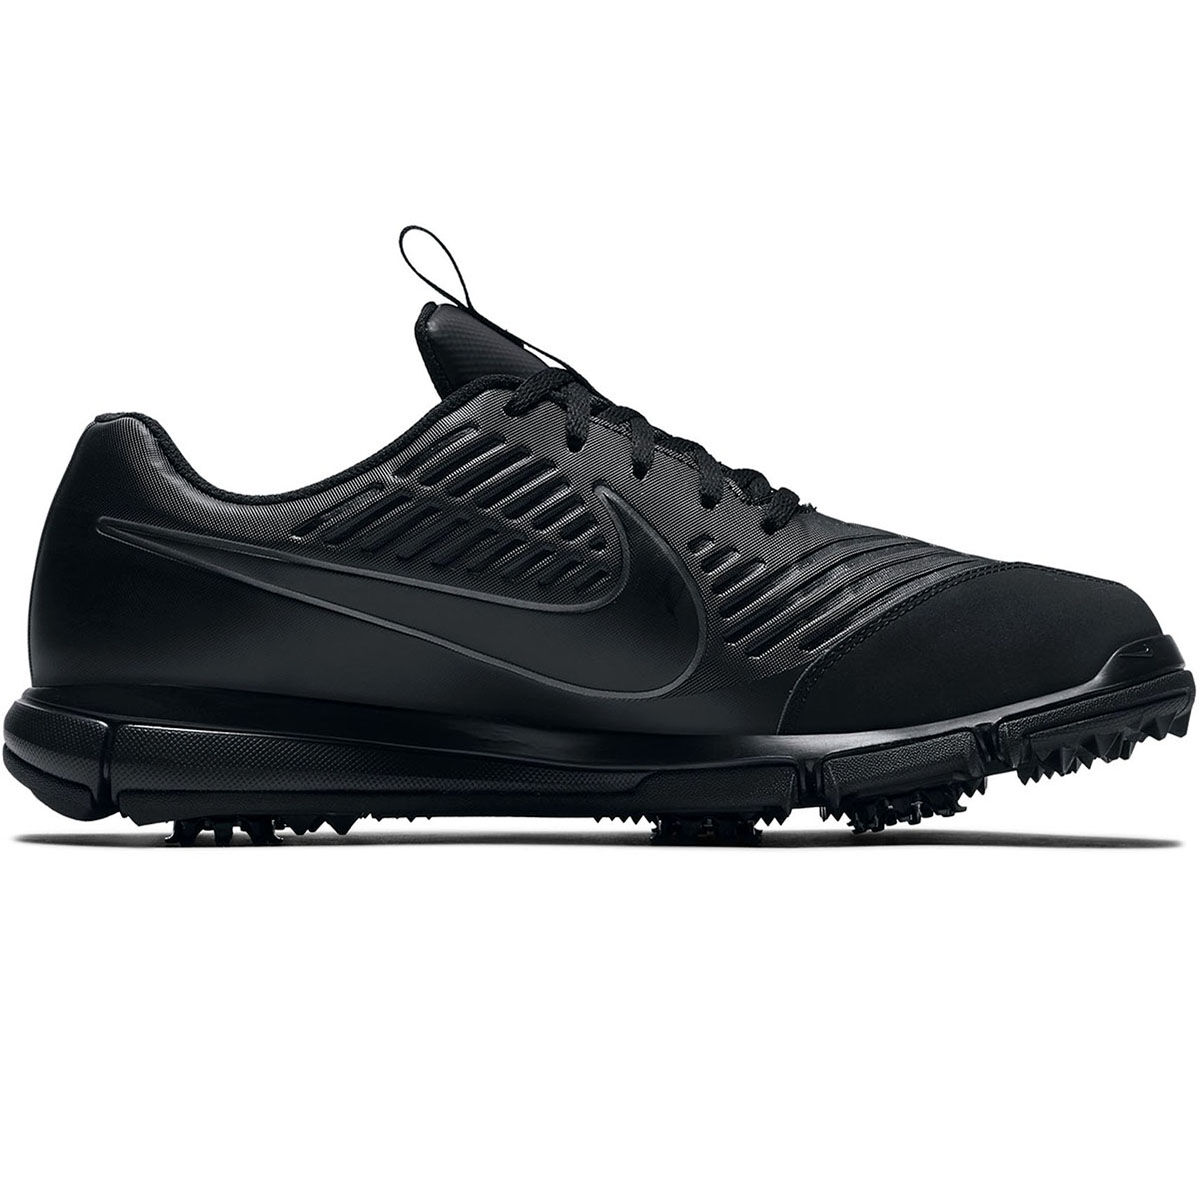 Nike Golf Explorer 2 S Shoes from 